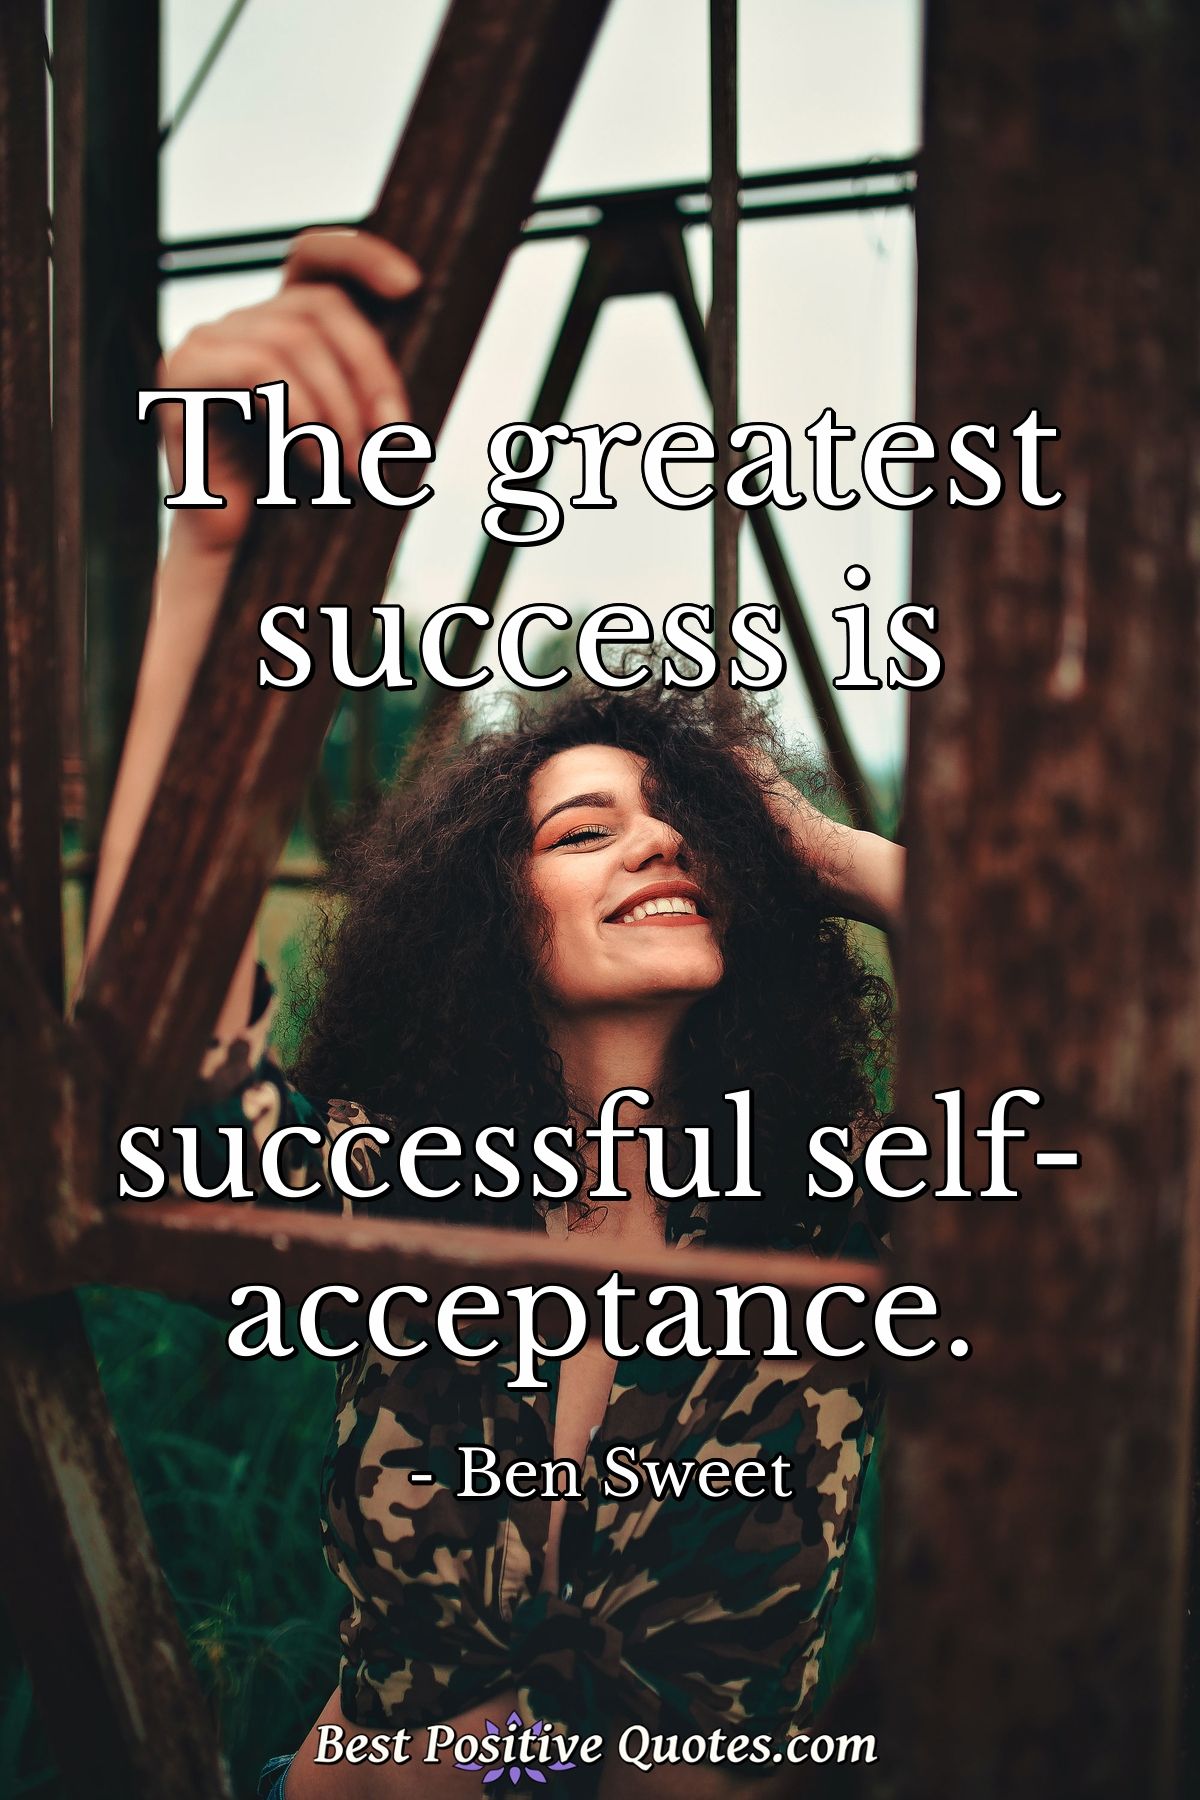 The greatest success is successful self-acceptance. - Ben Sweet